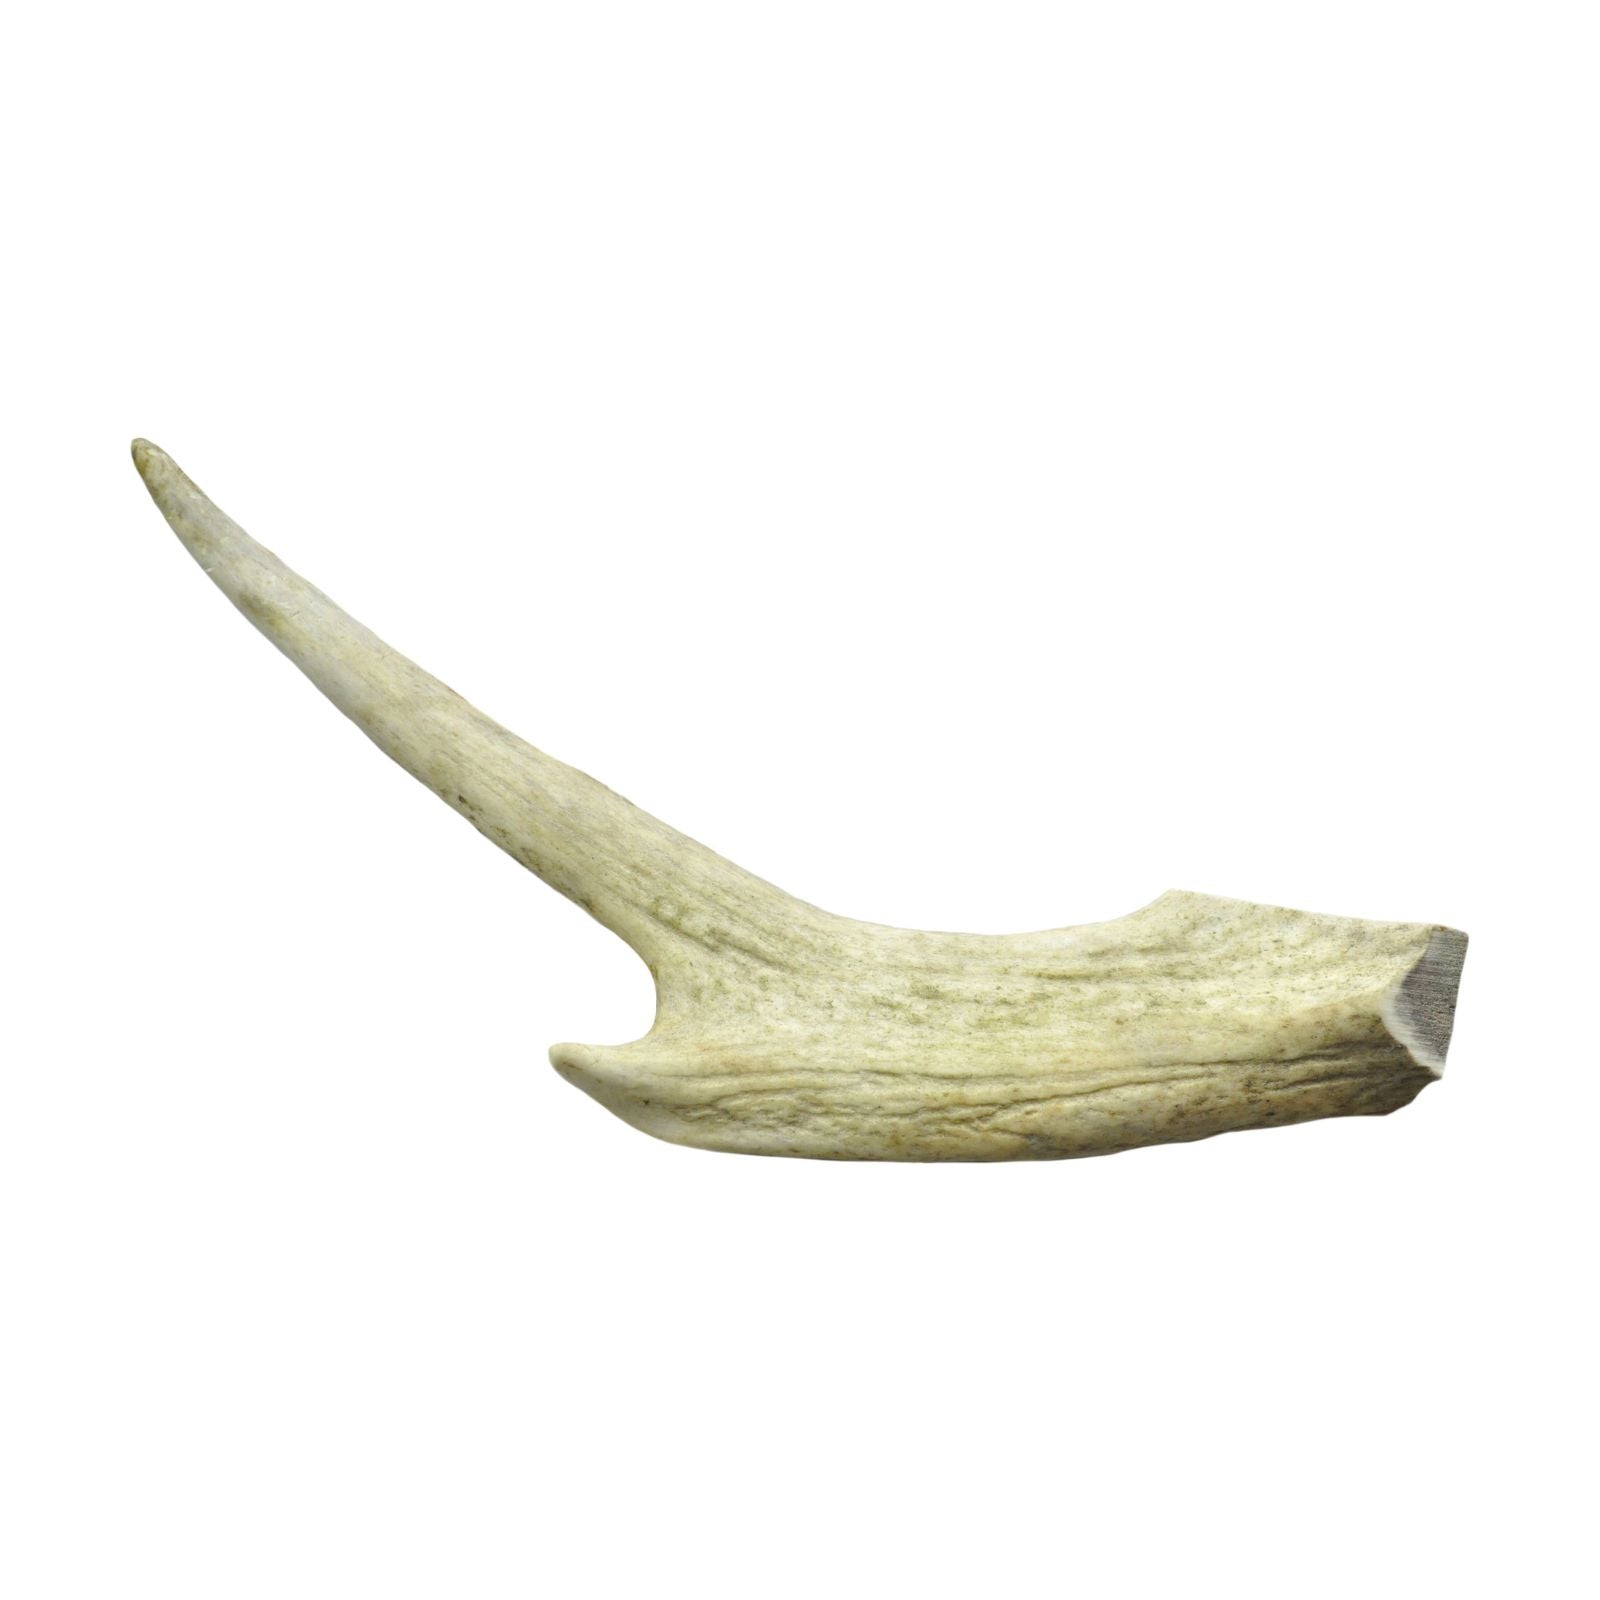 Tasty and Nutritious Large Deer Antler Dog Chew for Happy Doggos